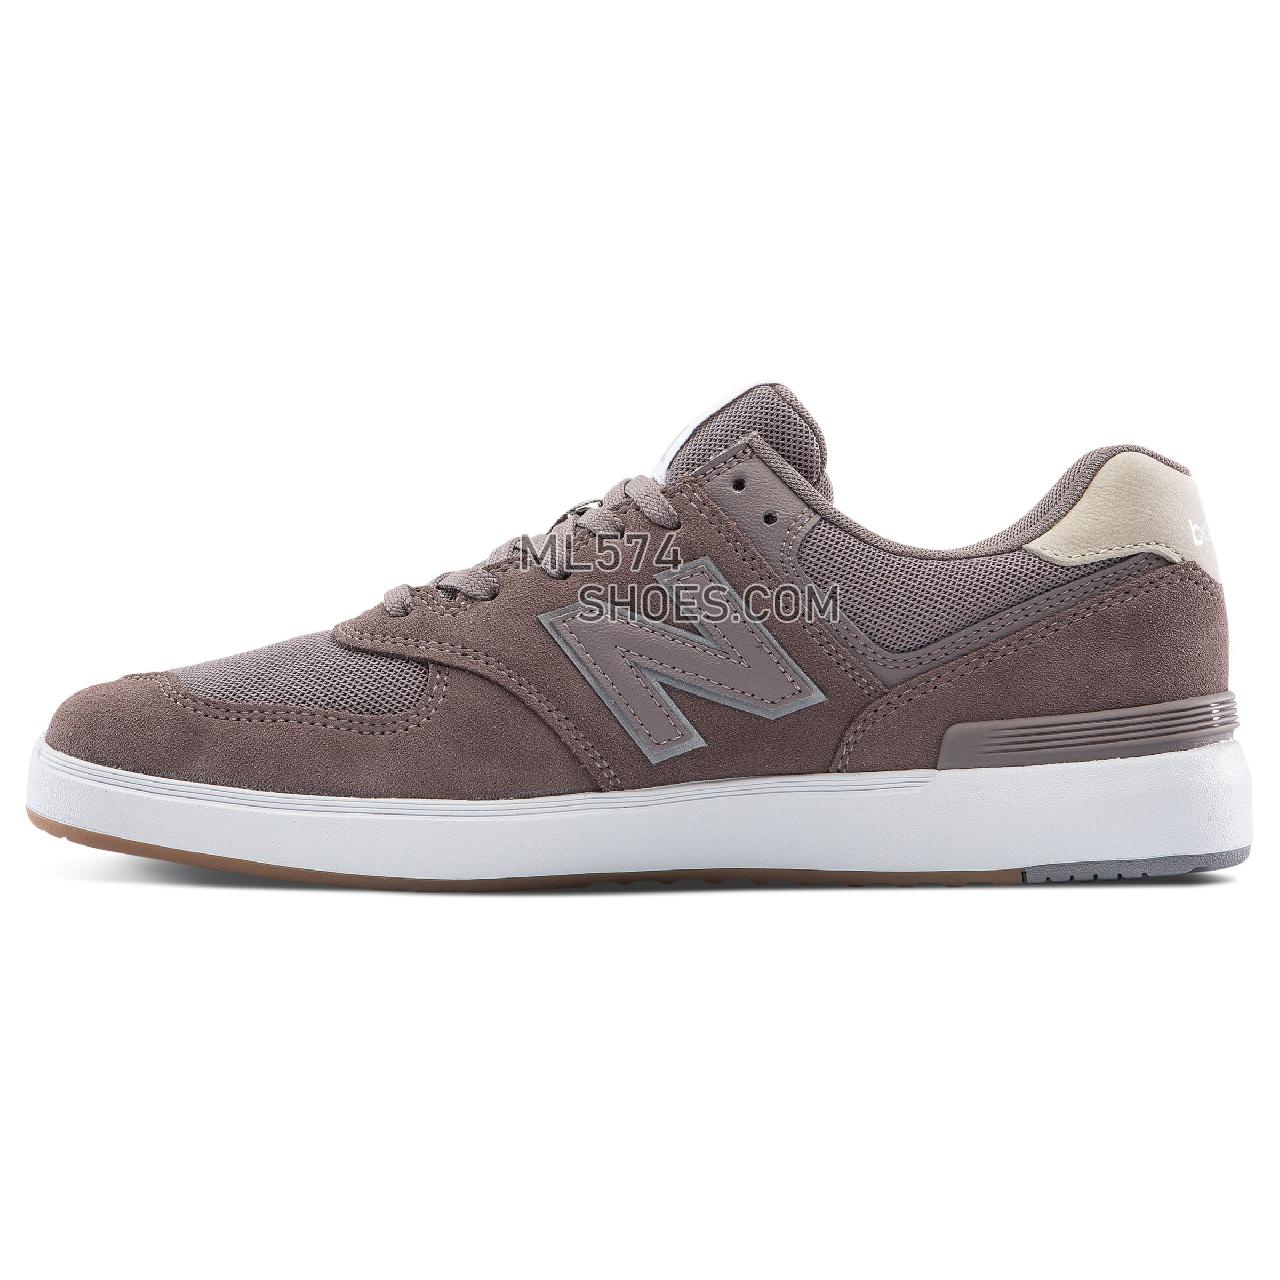 New Balance AM574 - Men's 574 - Classic Tan with White - AM574RSE